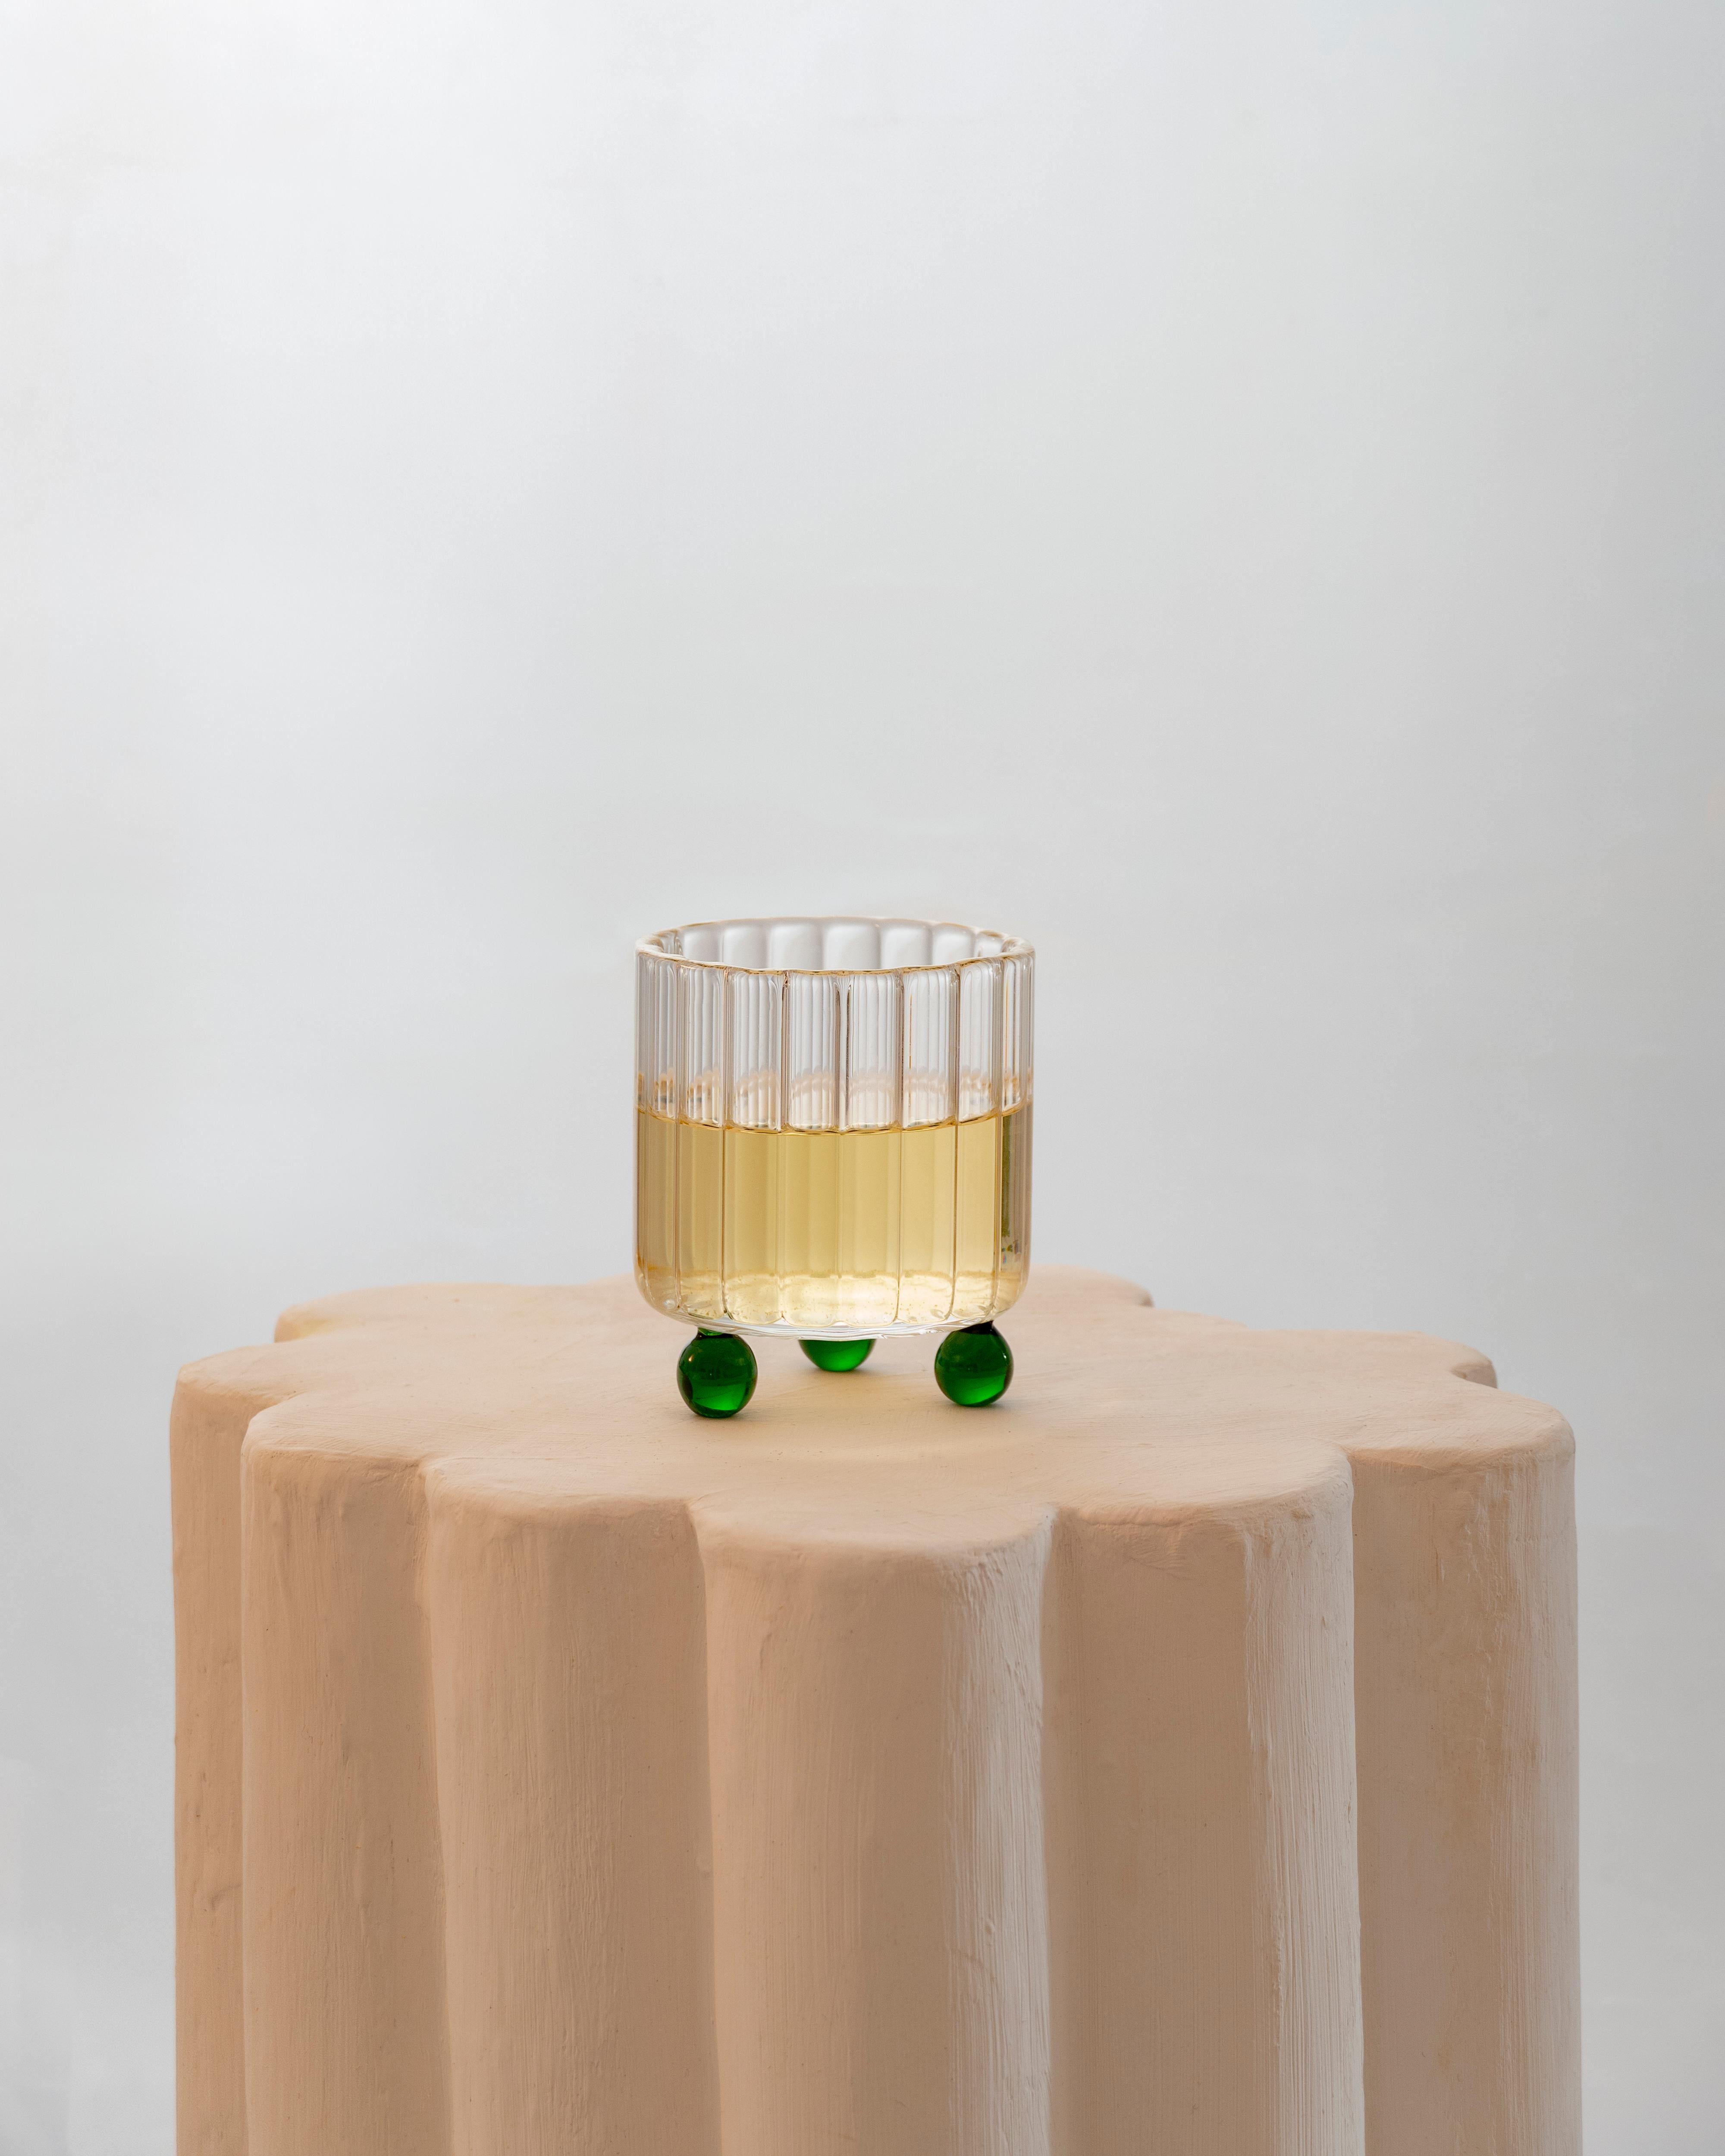 Post-Modern Contemporary Green Lowball Glass by Agustina Bottoni — Handmade in Italy For Sale